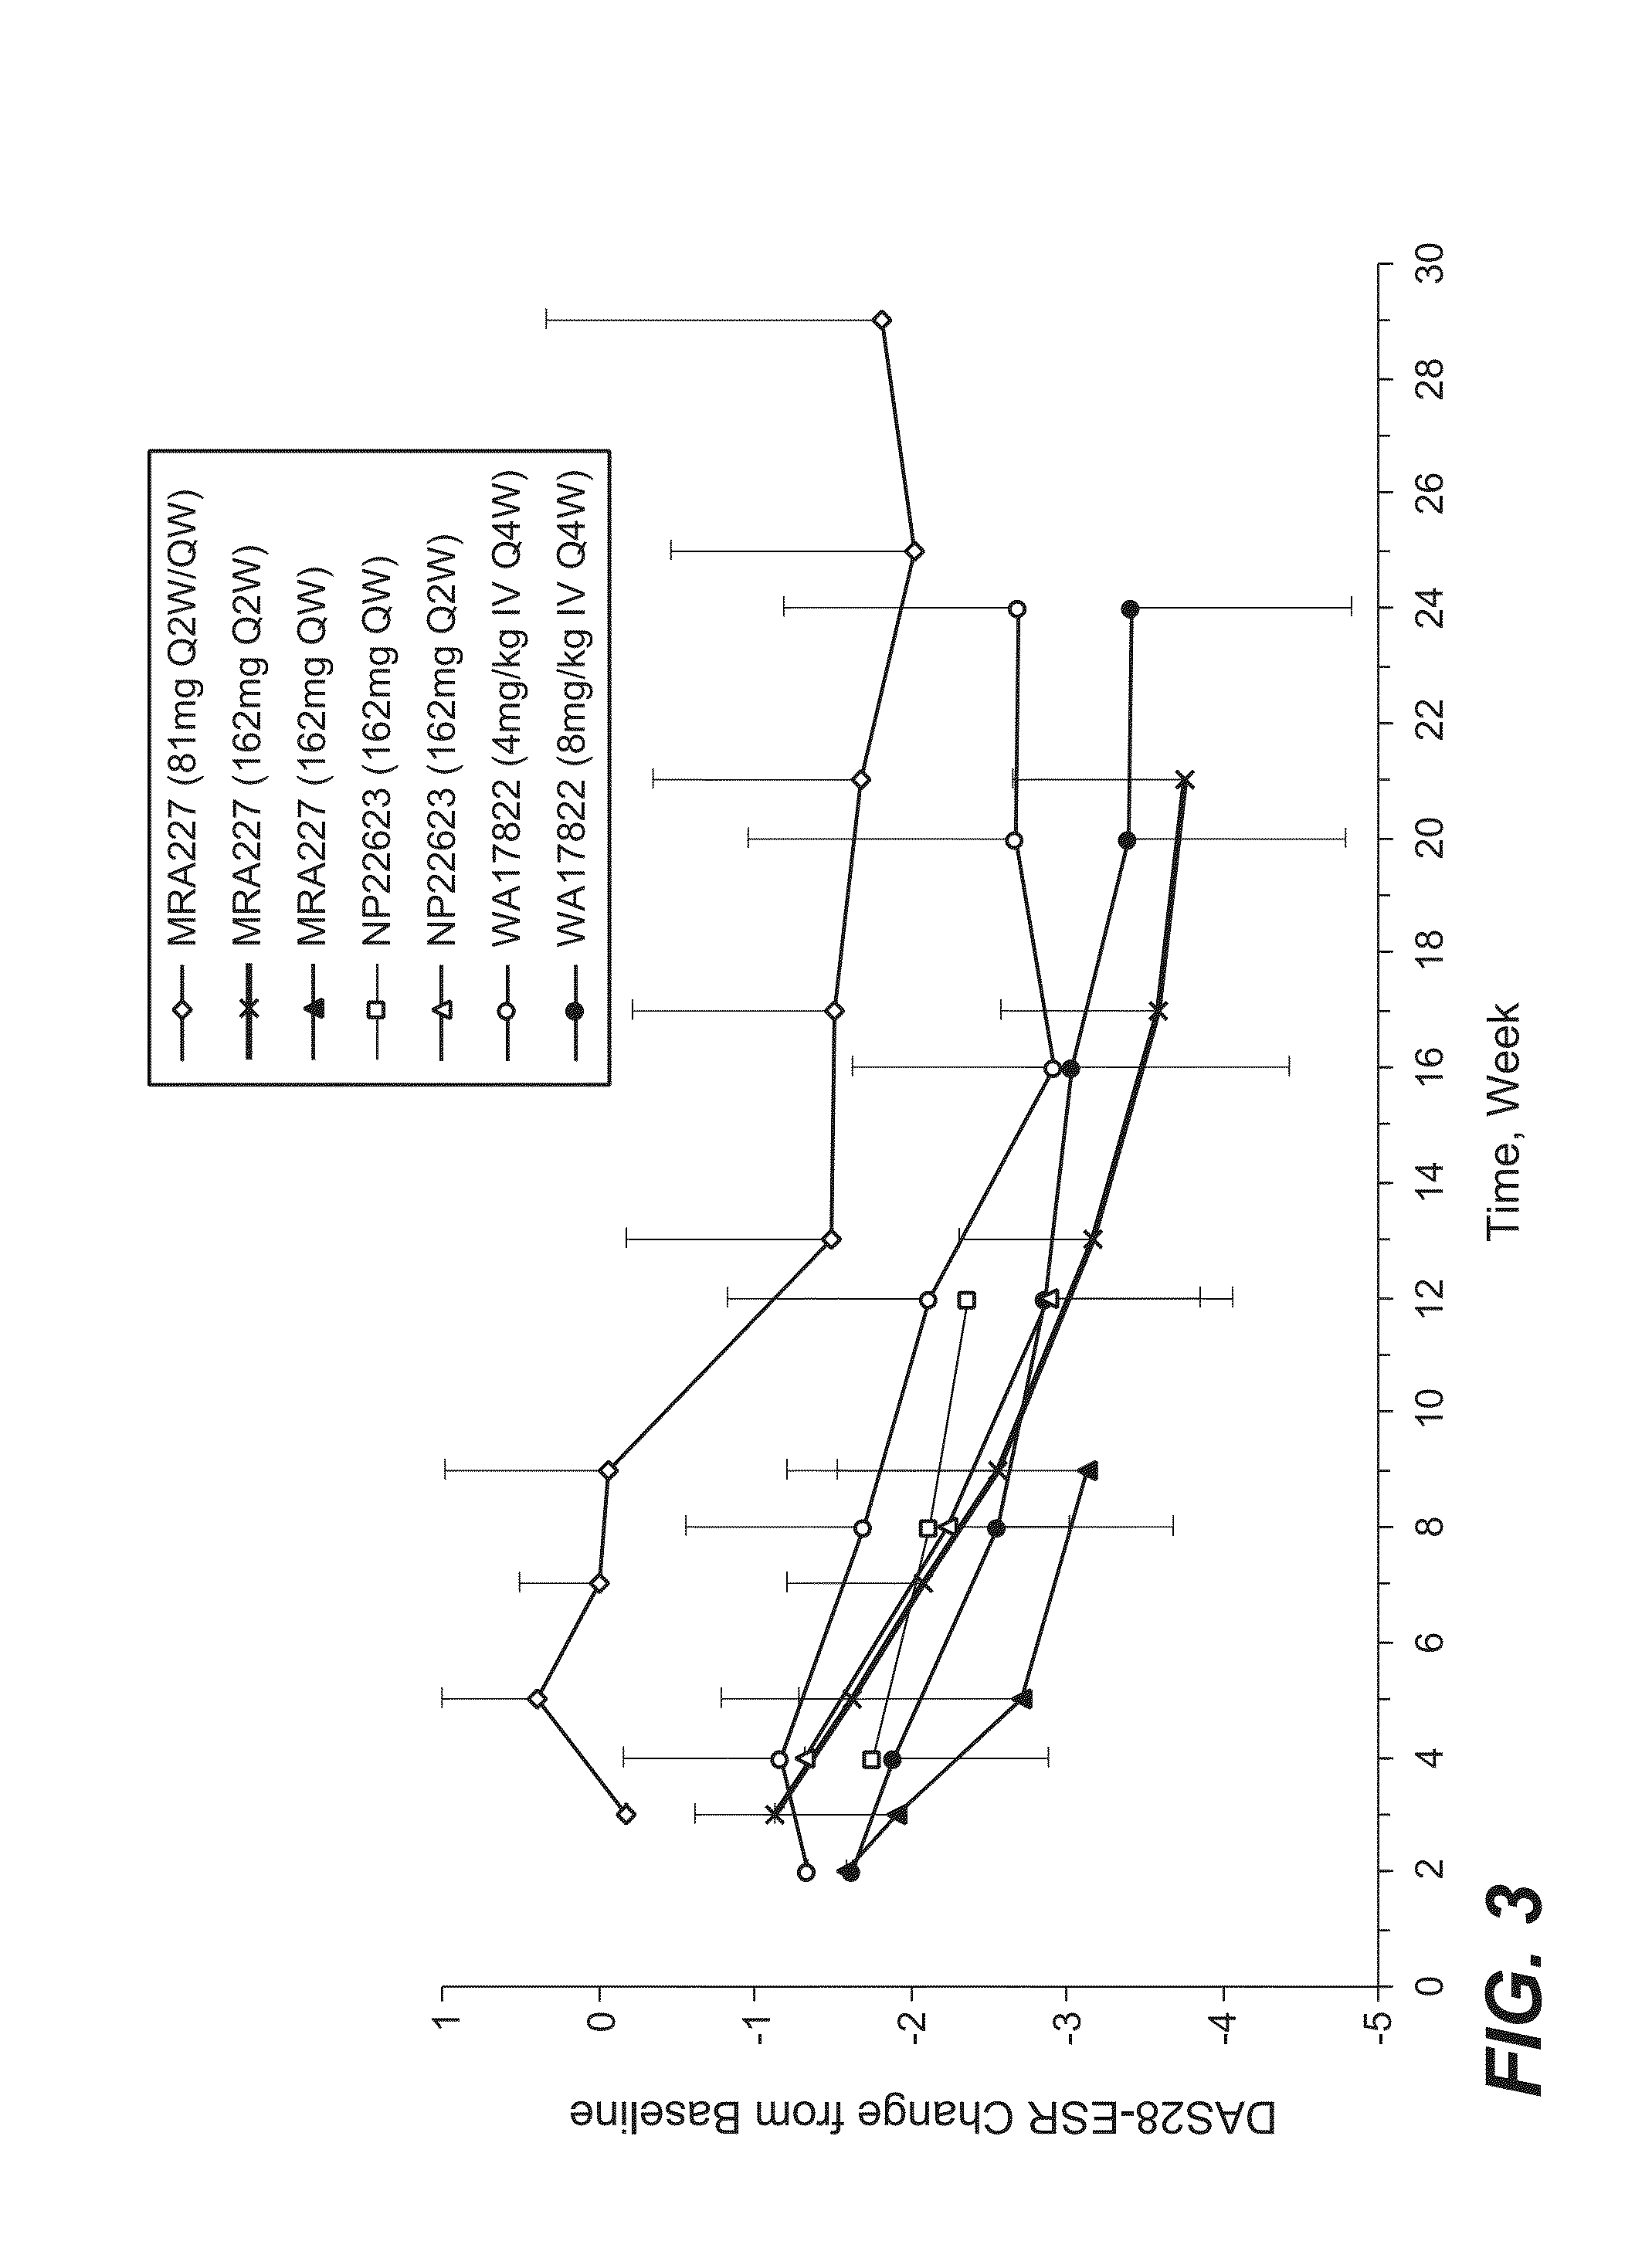 Subcutaneously administered anti-IL-6 receptor antibody